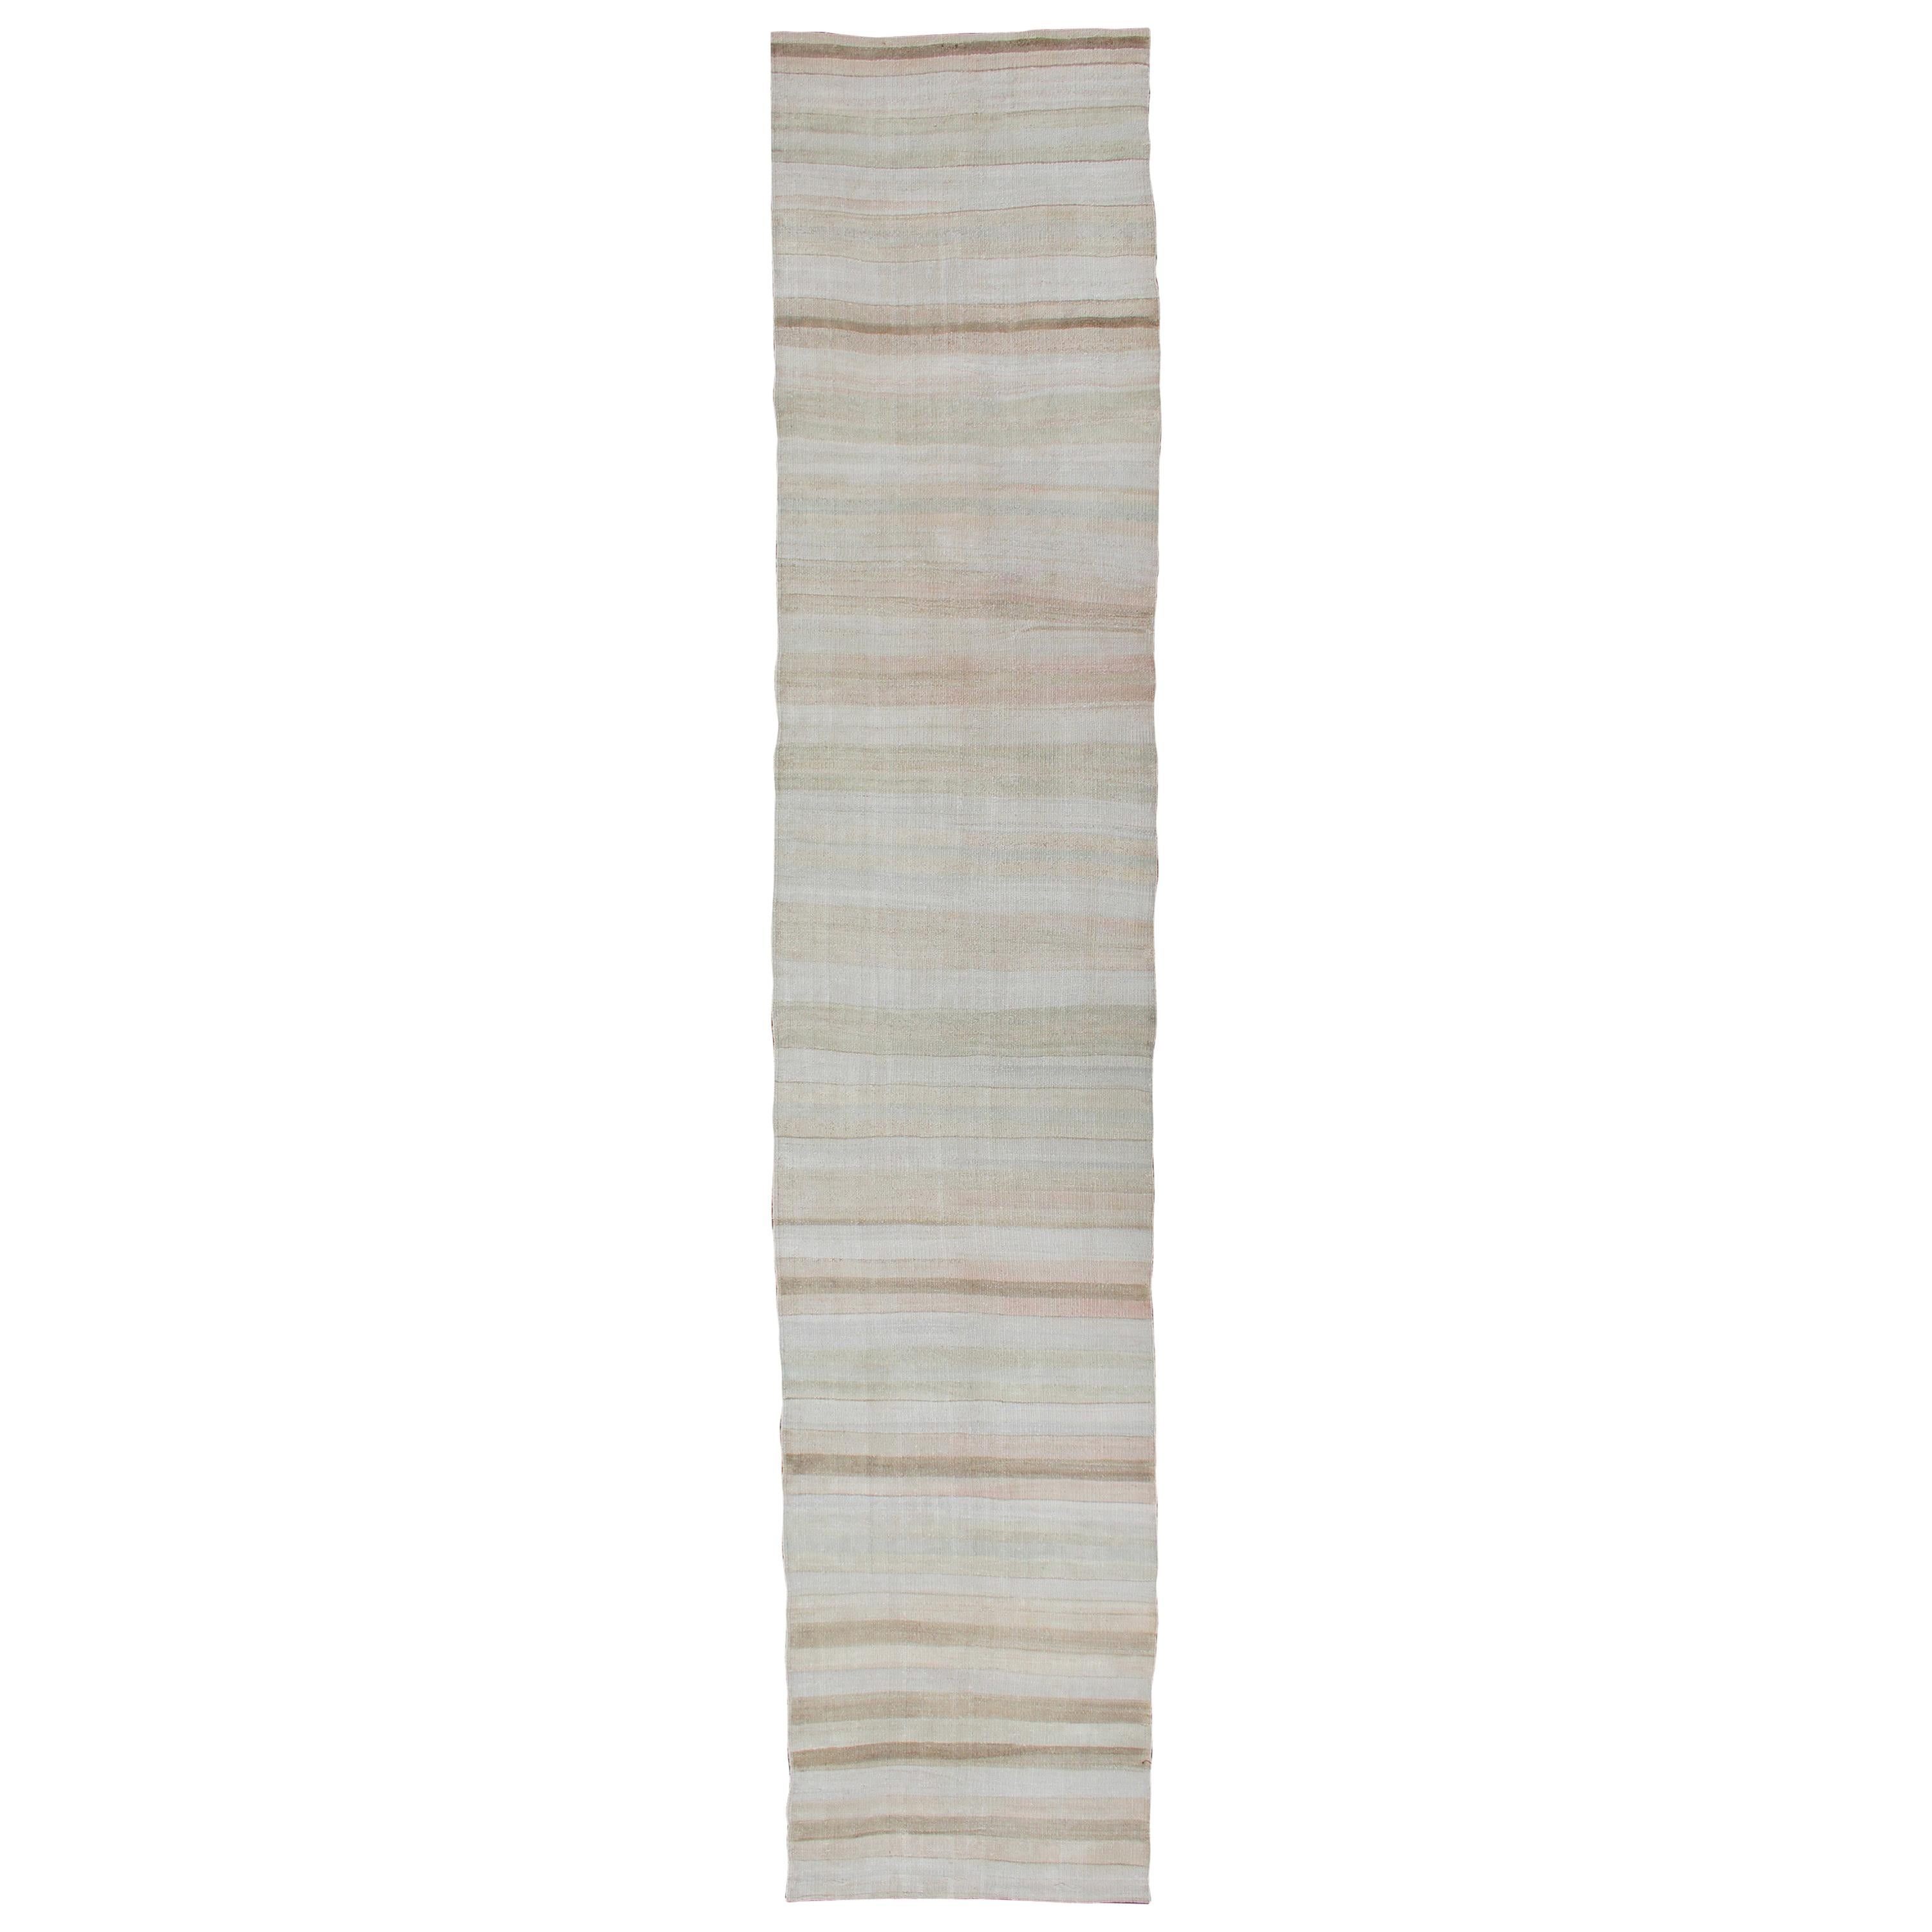 Vintage Turkish Kilim Runner with Soft Stripes and Modern Design in Muted Colors